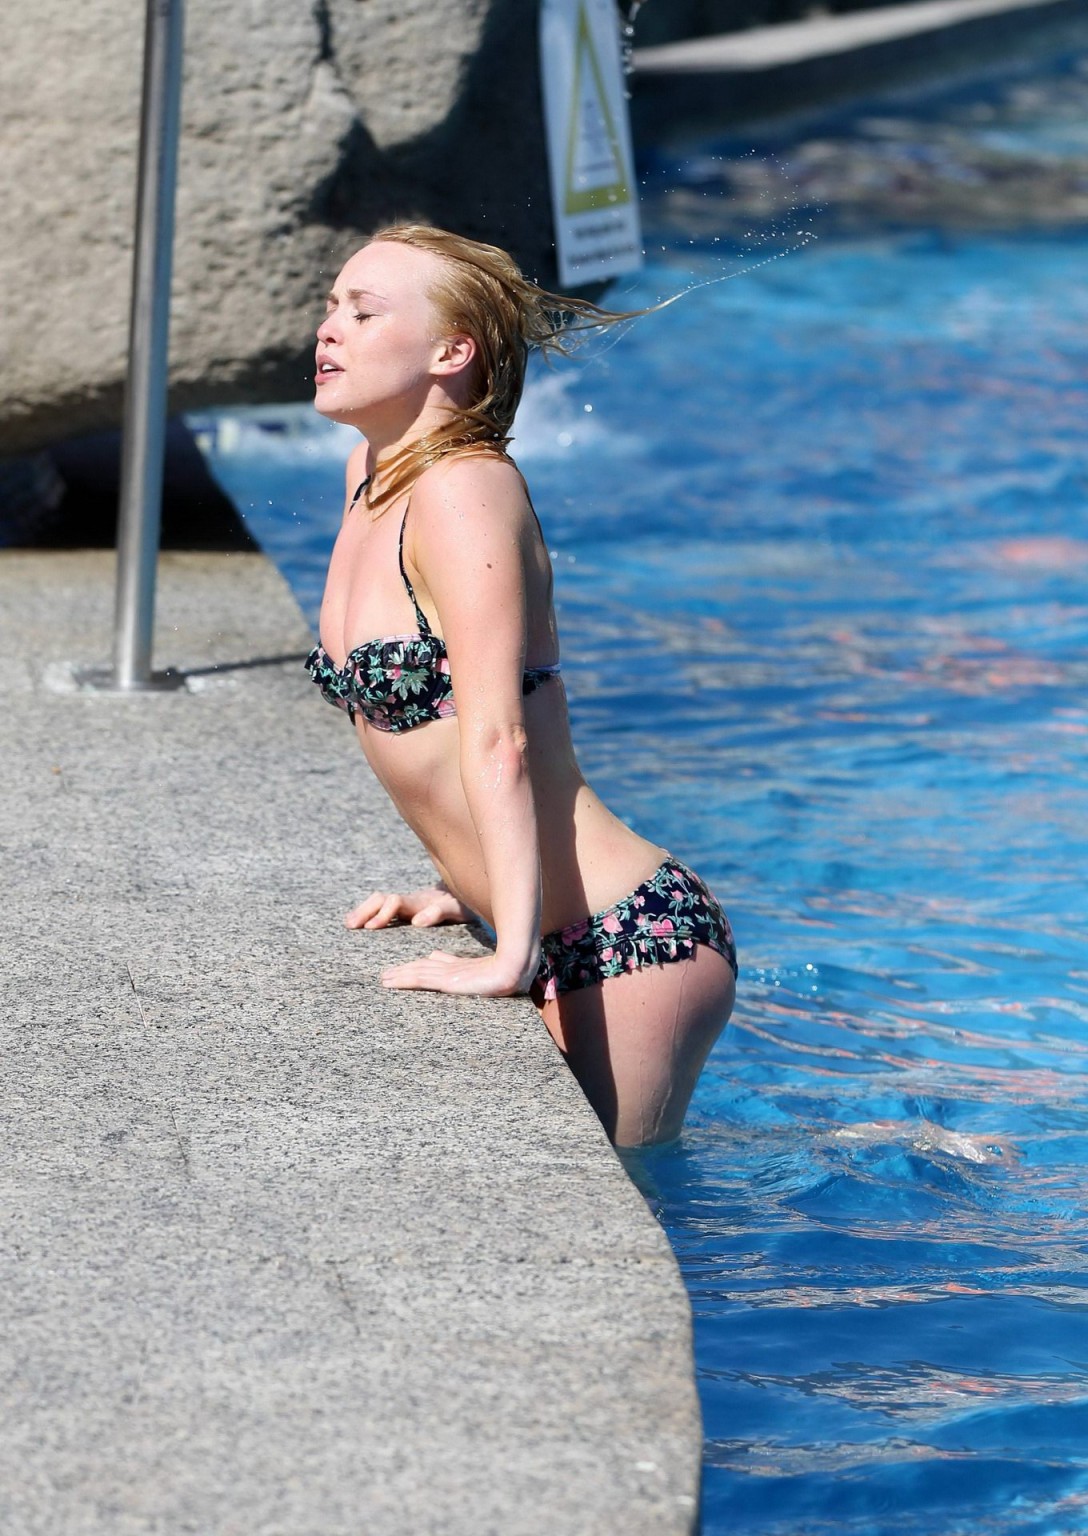 Jorgie Porter showing off her hot body in a skimpy floral bikini at the beach in #75172569